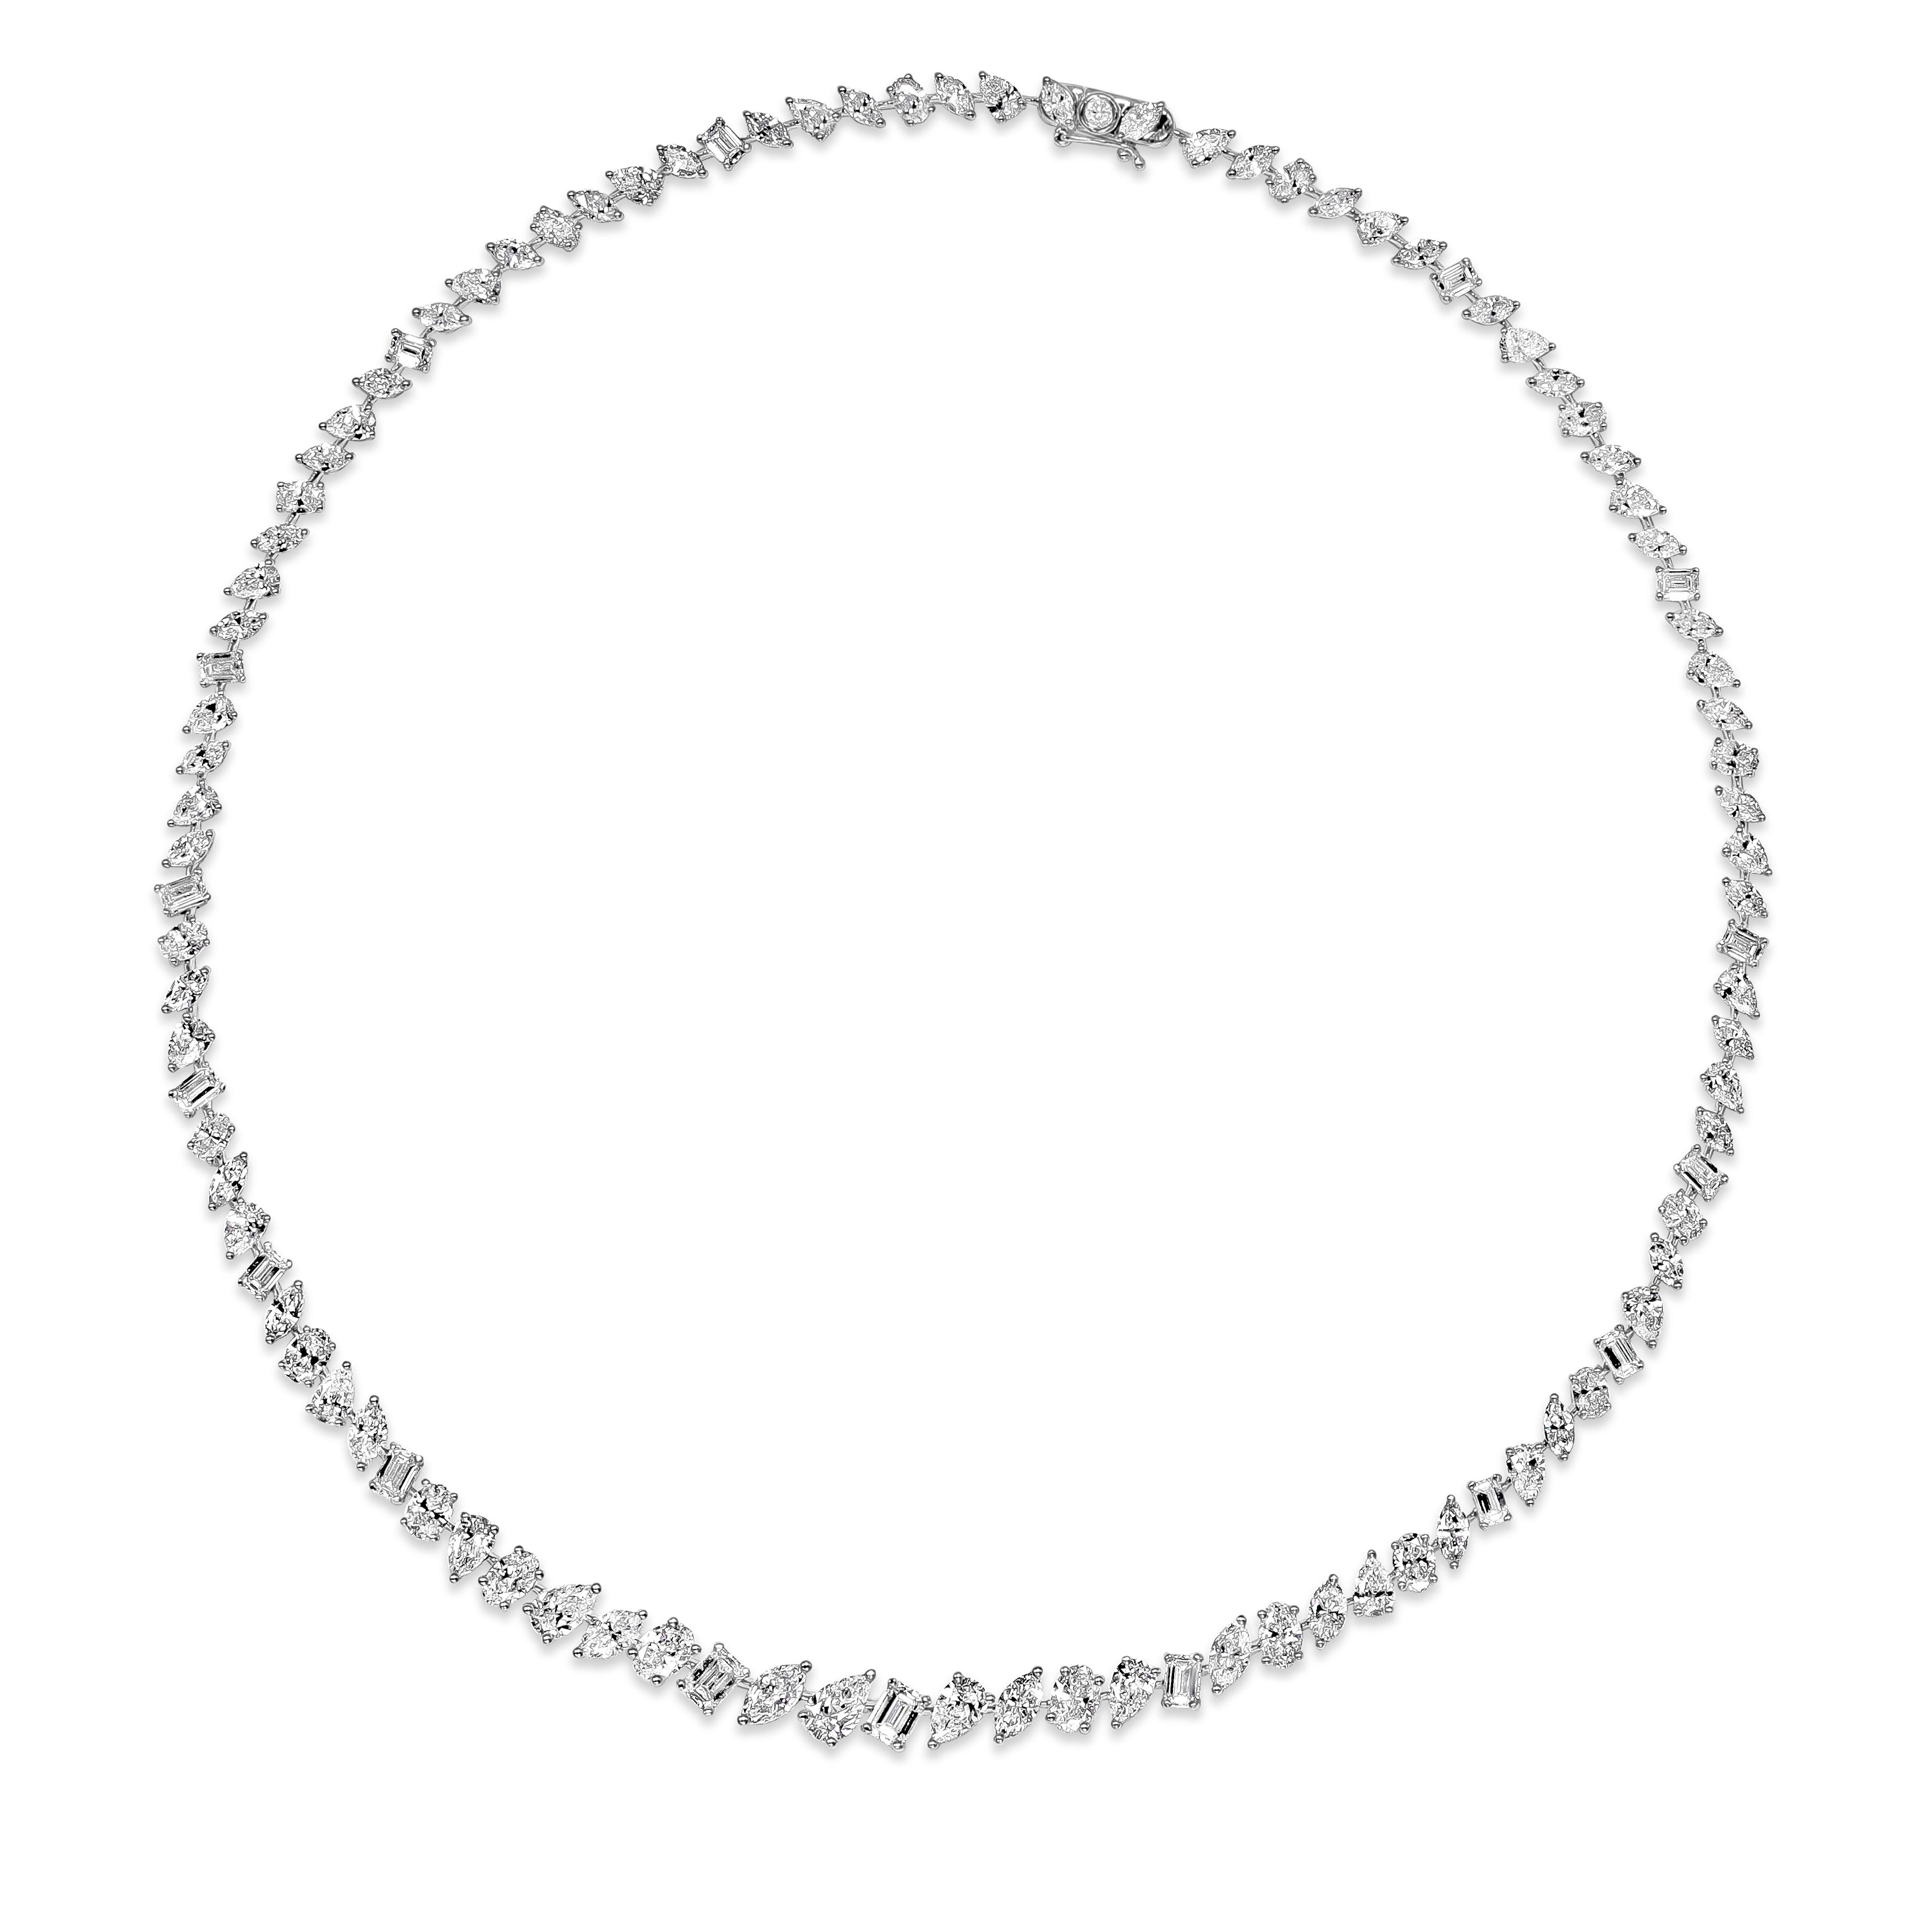 Contemporary Roman Malakov 19.38 Carats Total Fancy Shape Mixed Cut Diamond Riviere Necklace For Sale